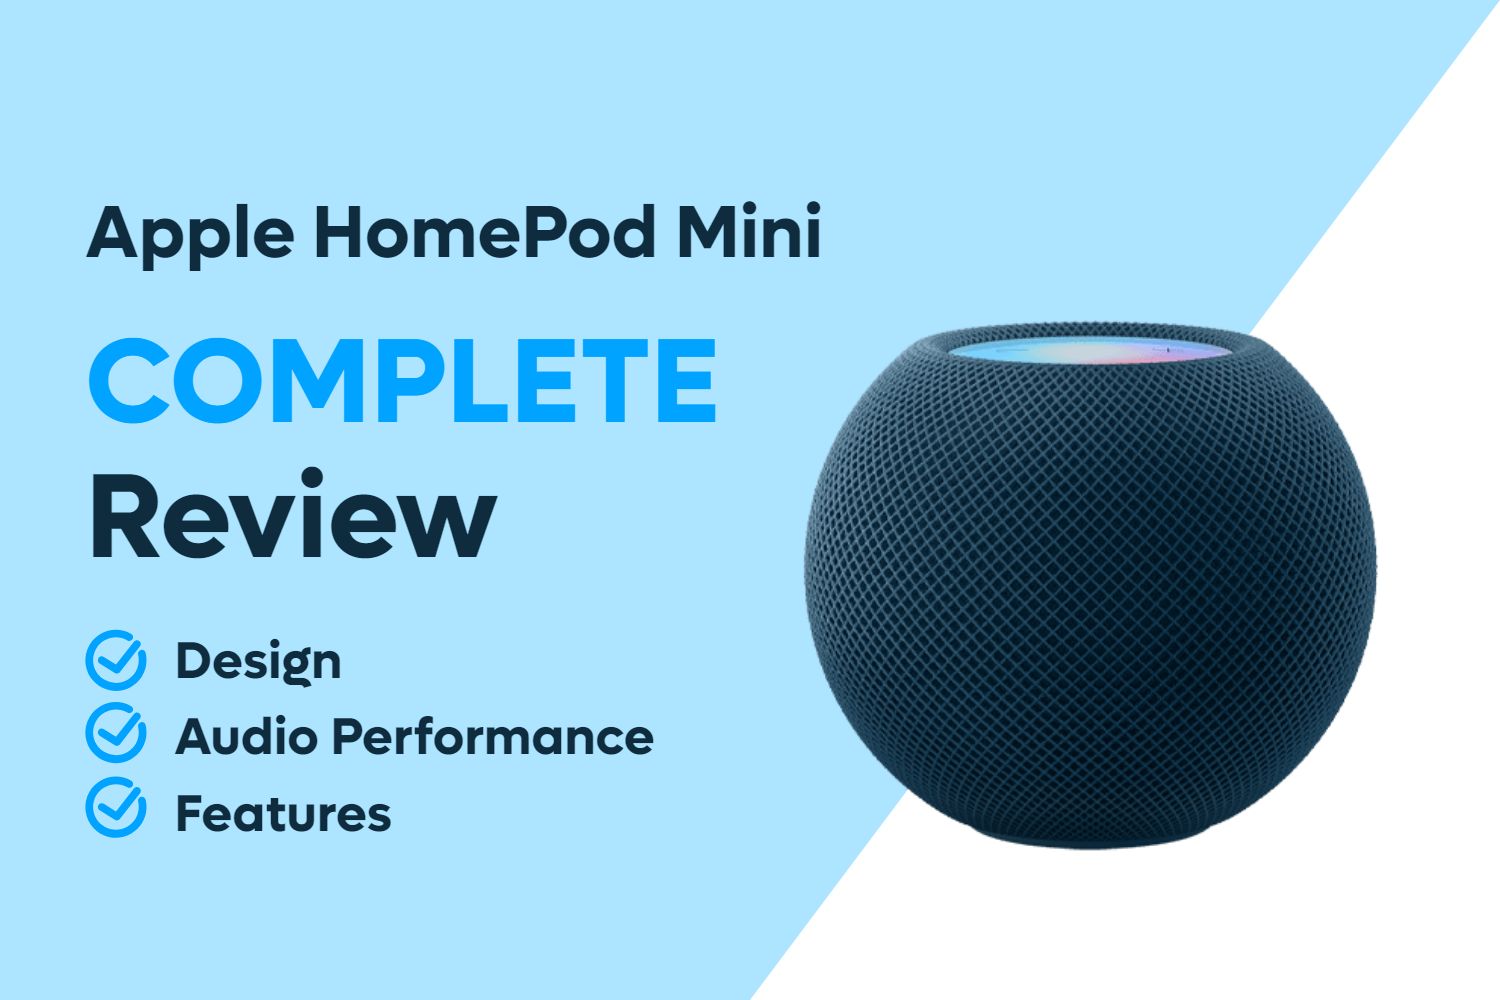 Apple HomePod Mini Review: Design, Features, Performance